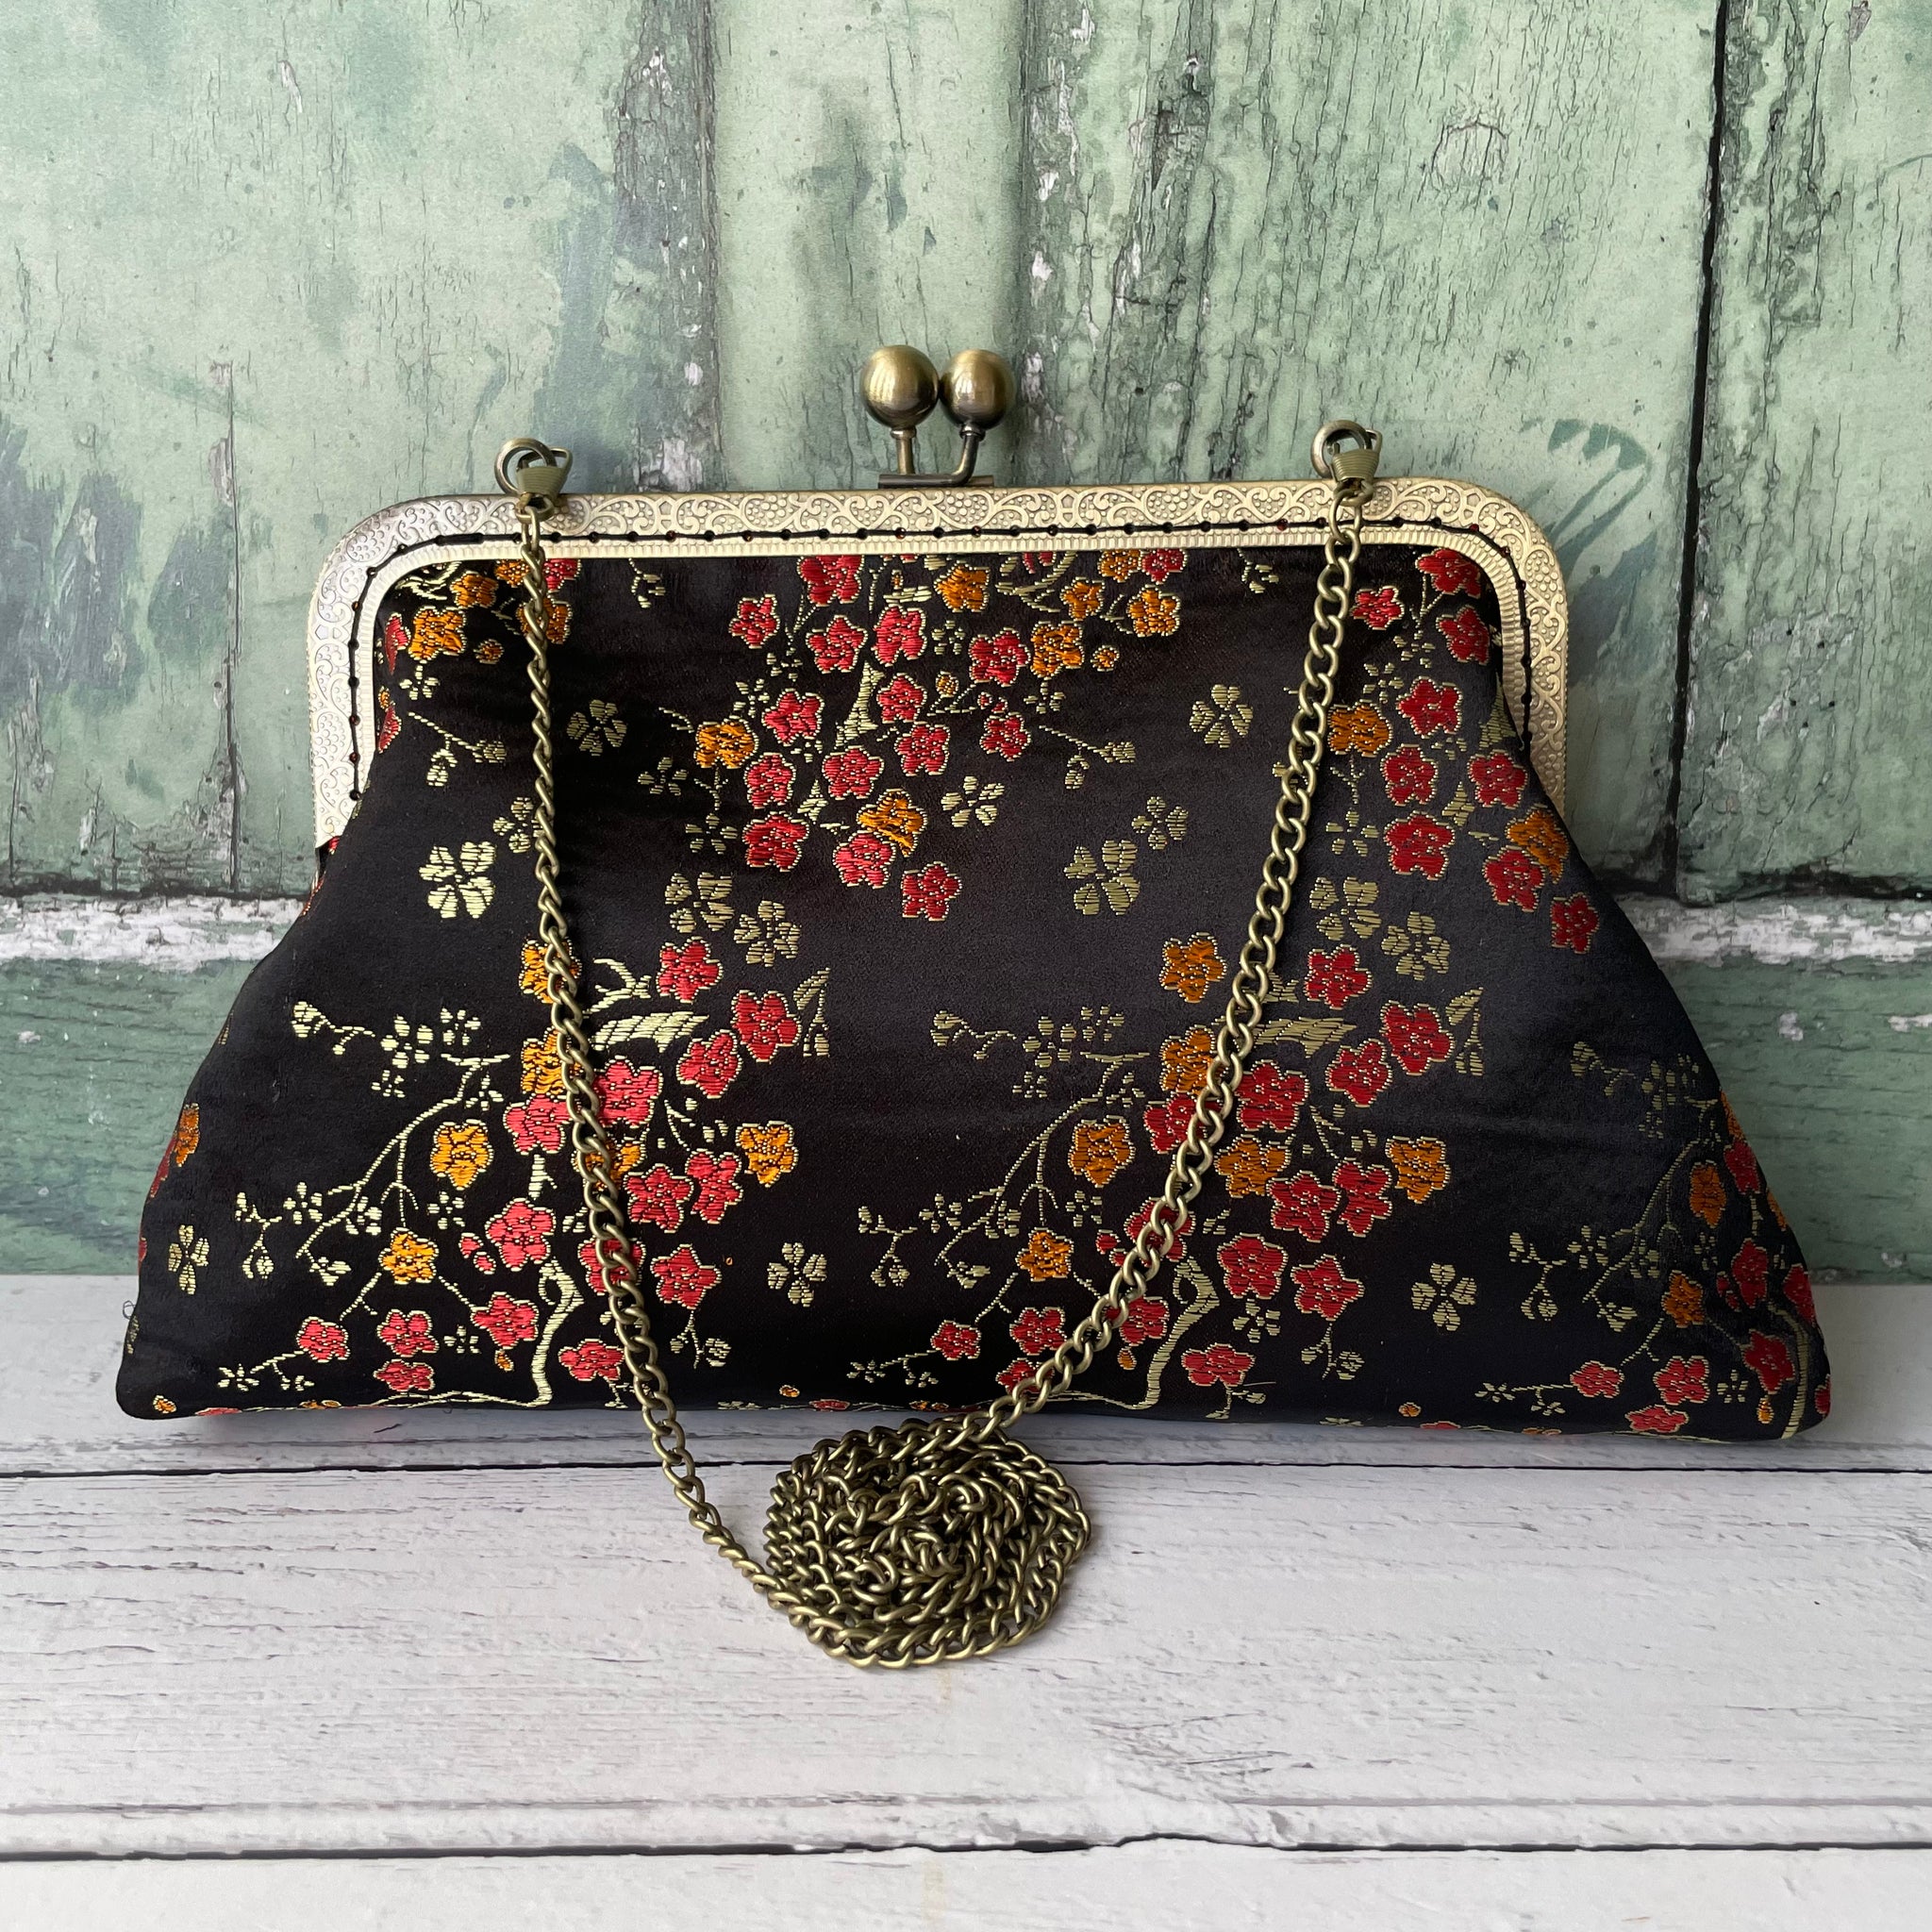 Black and Gold Blossom Floral Brocade 8 Sew-In Bronze Clasp Purse Frame Clutch Bag